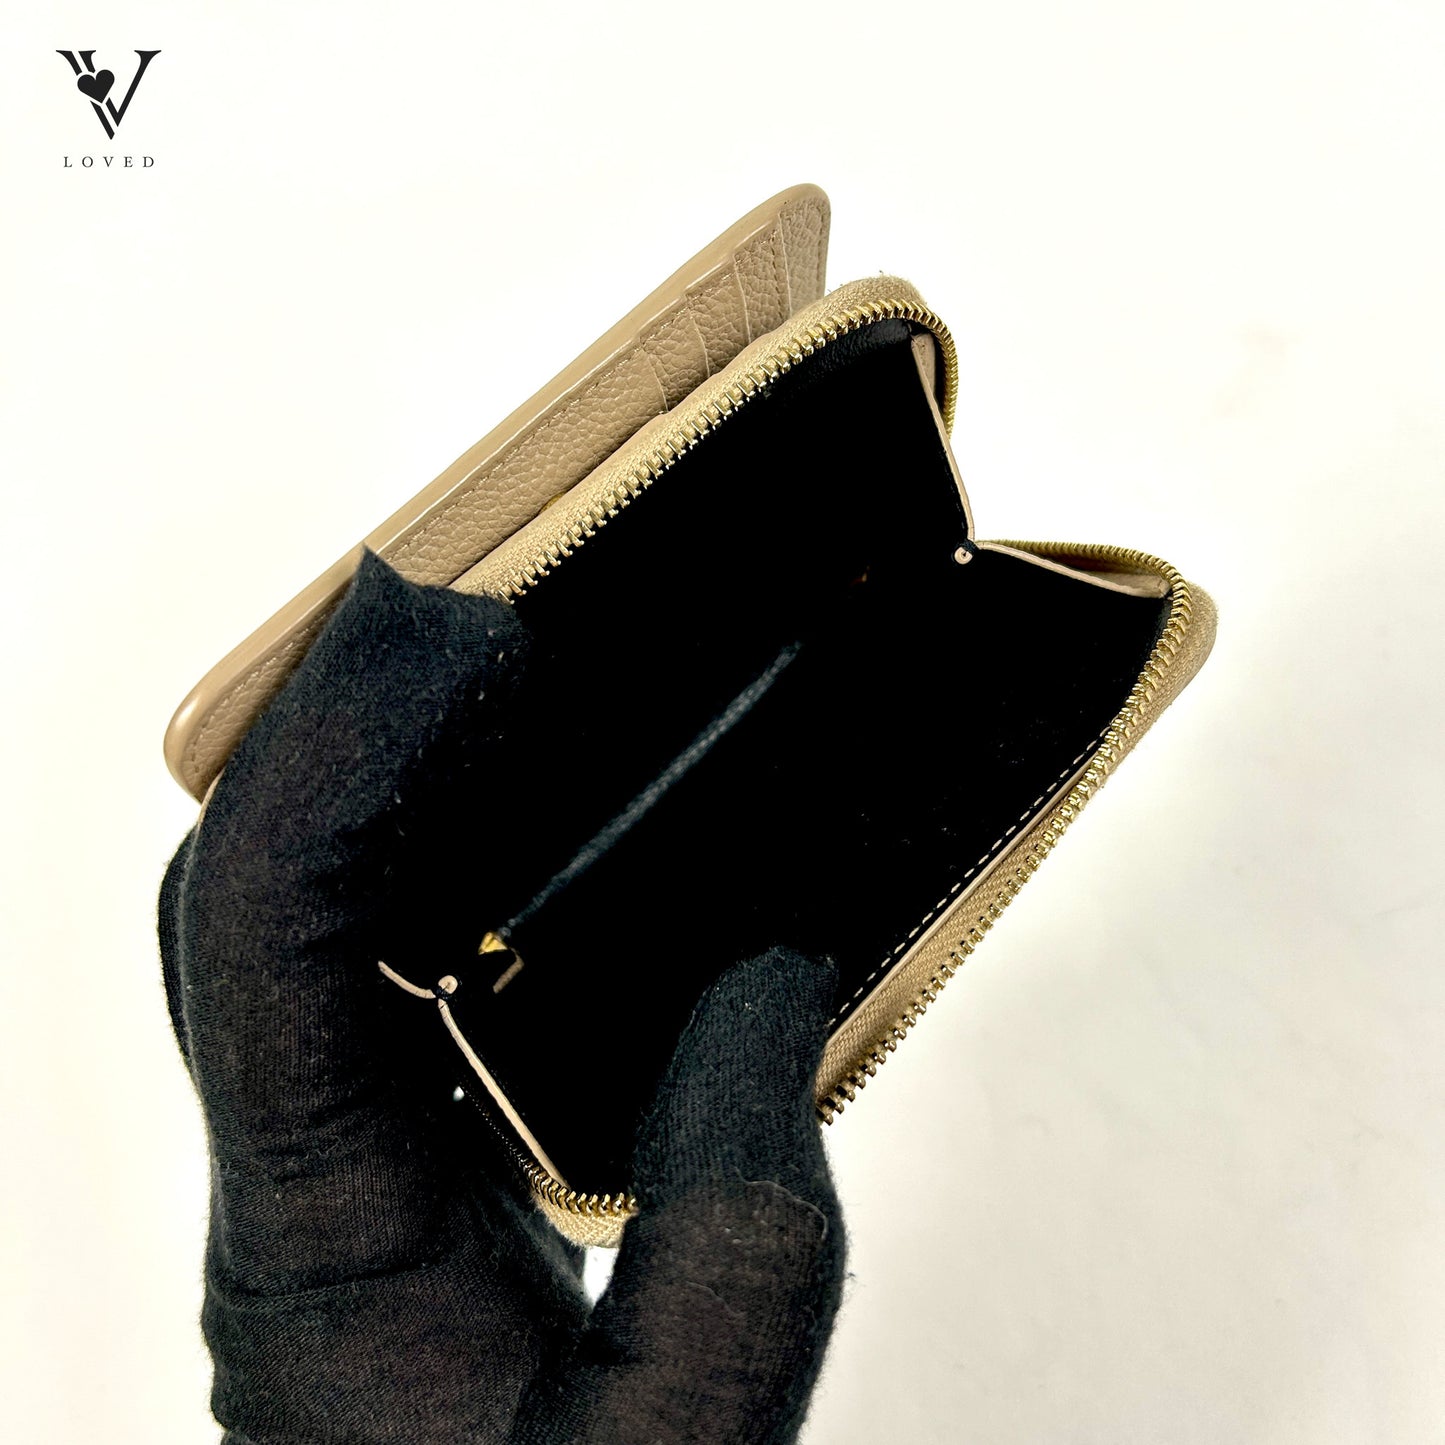 Yves Saint Laurent Line Compact Zippered Wallet in Grained Leather